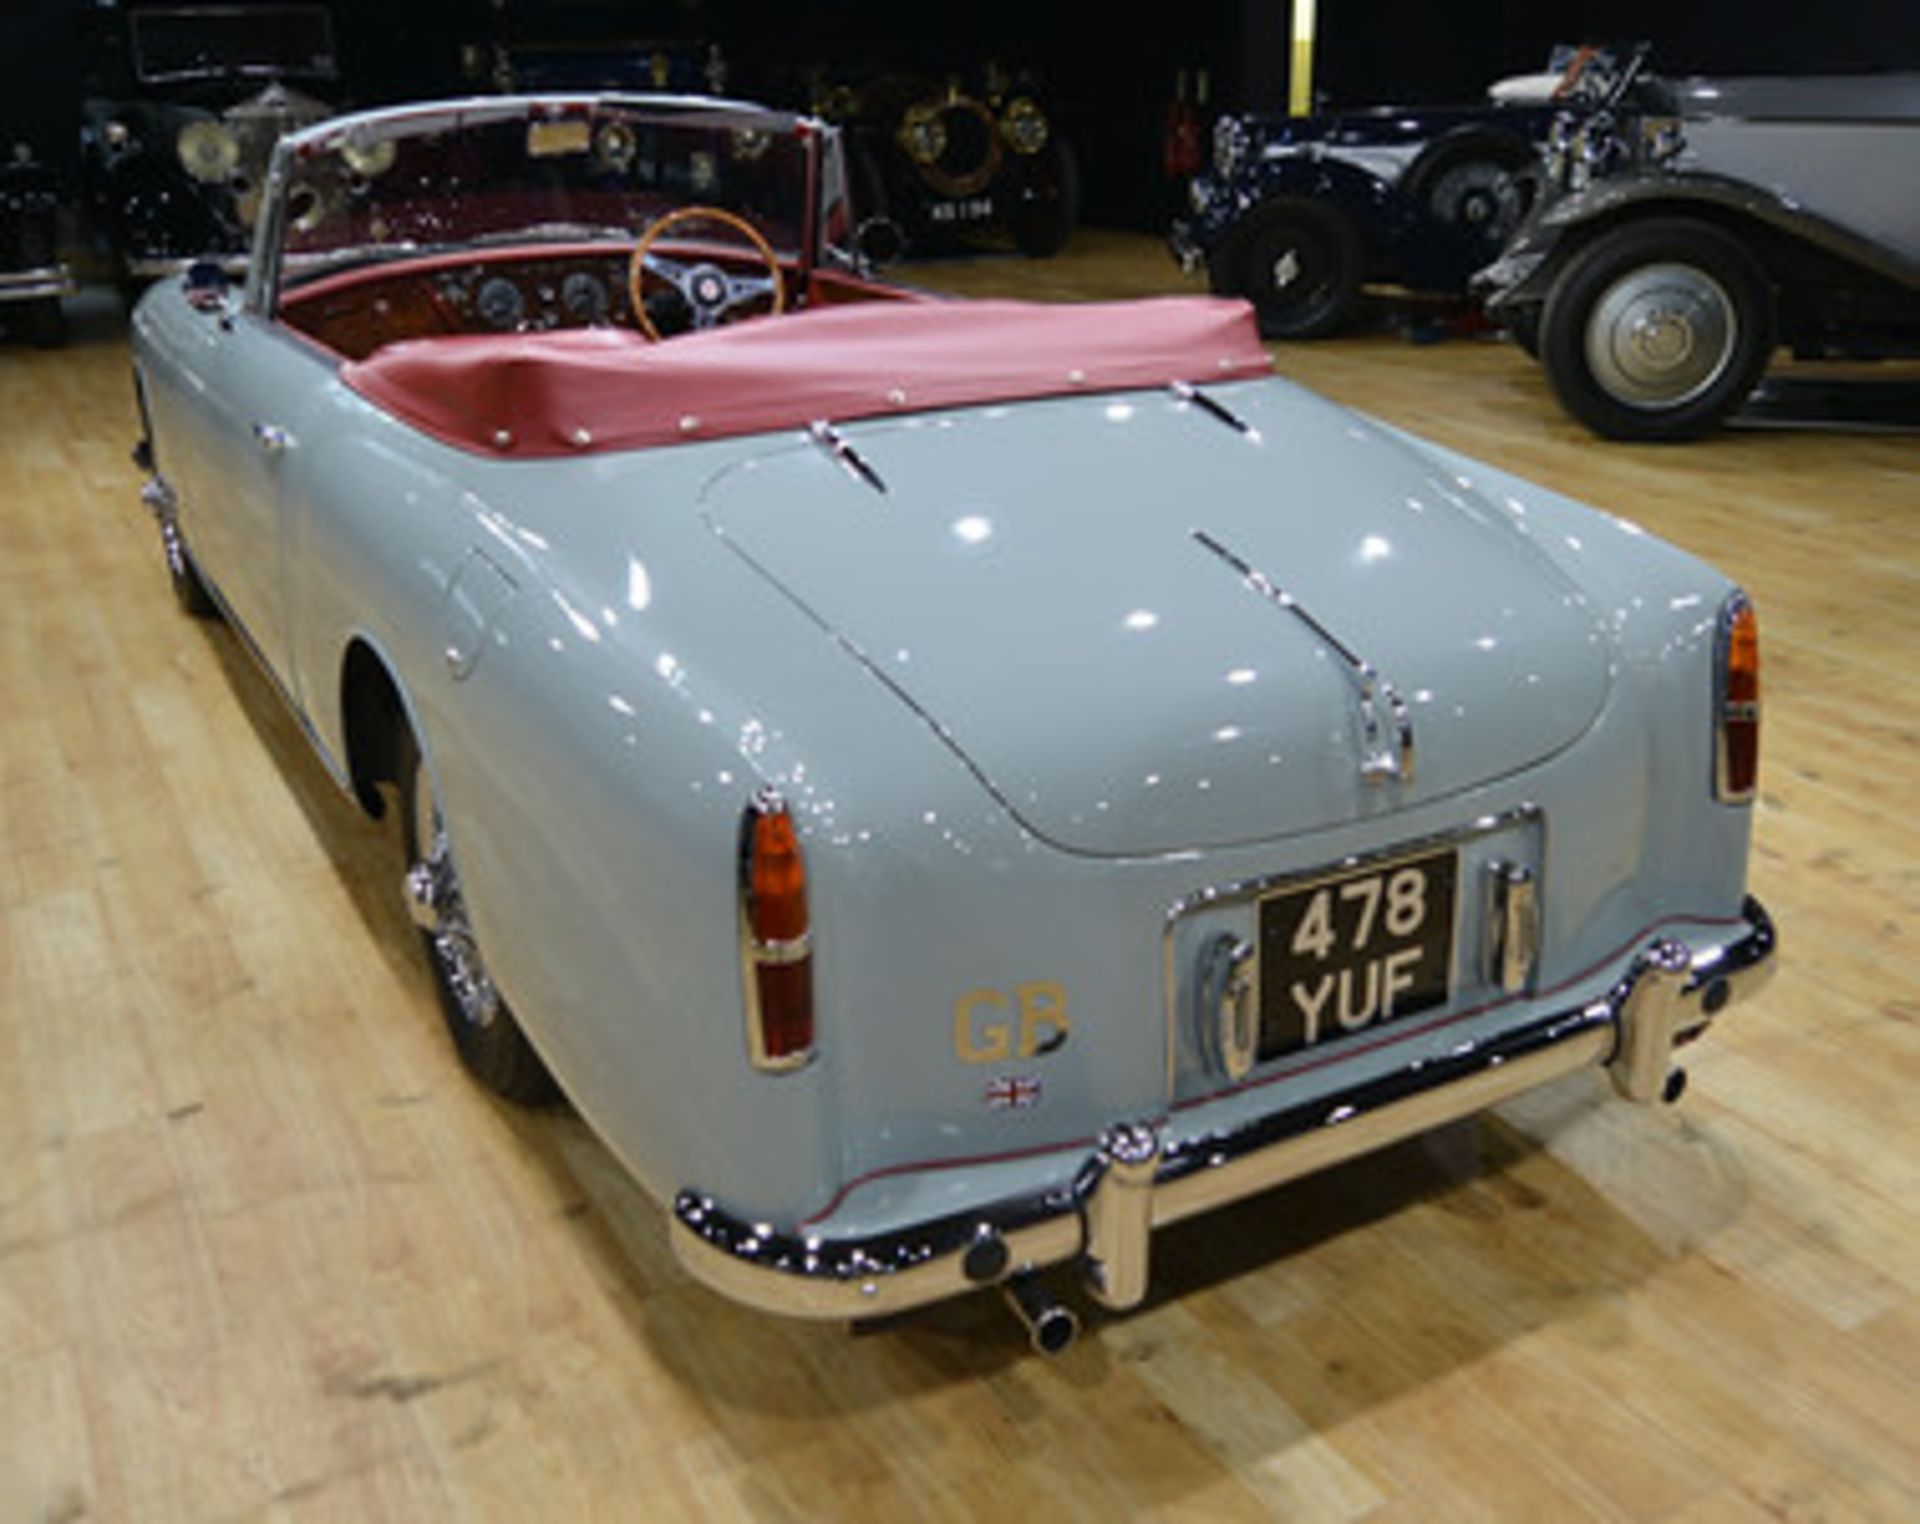 1960 Alvis TD21 Convertible.  Chassis Number: 26219 
Registration number: 478YUF  Recipient of a - Image 15 of 19